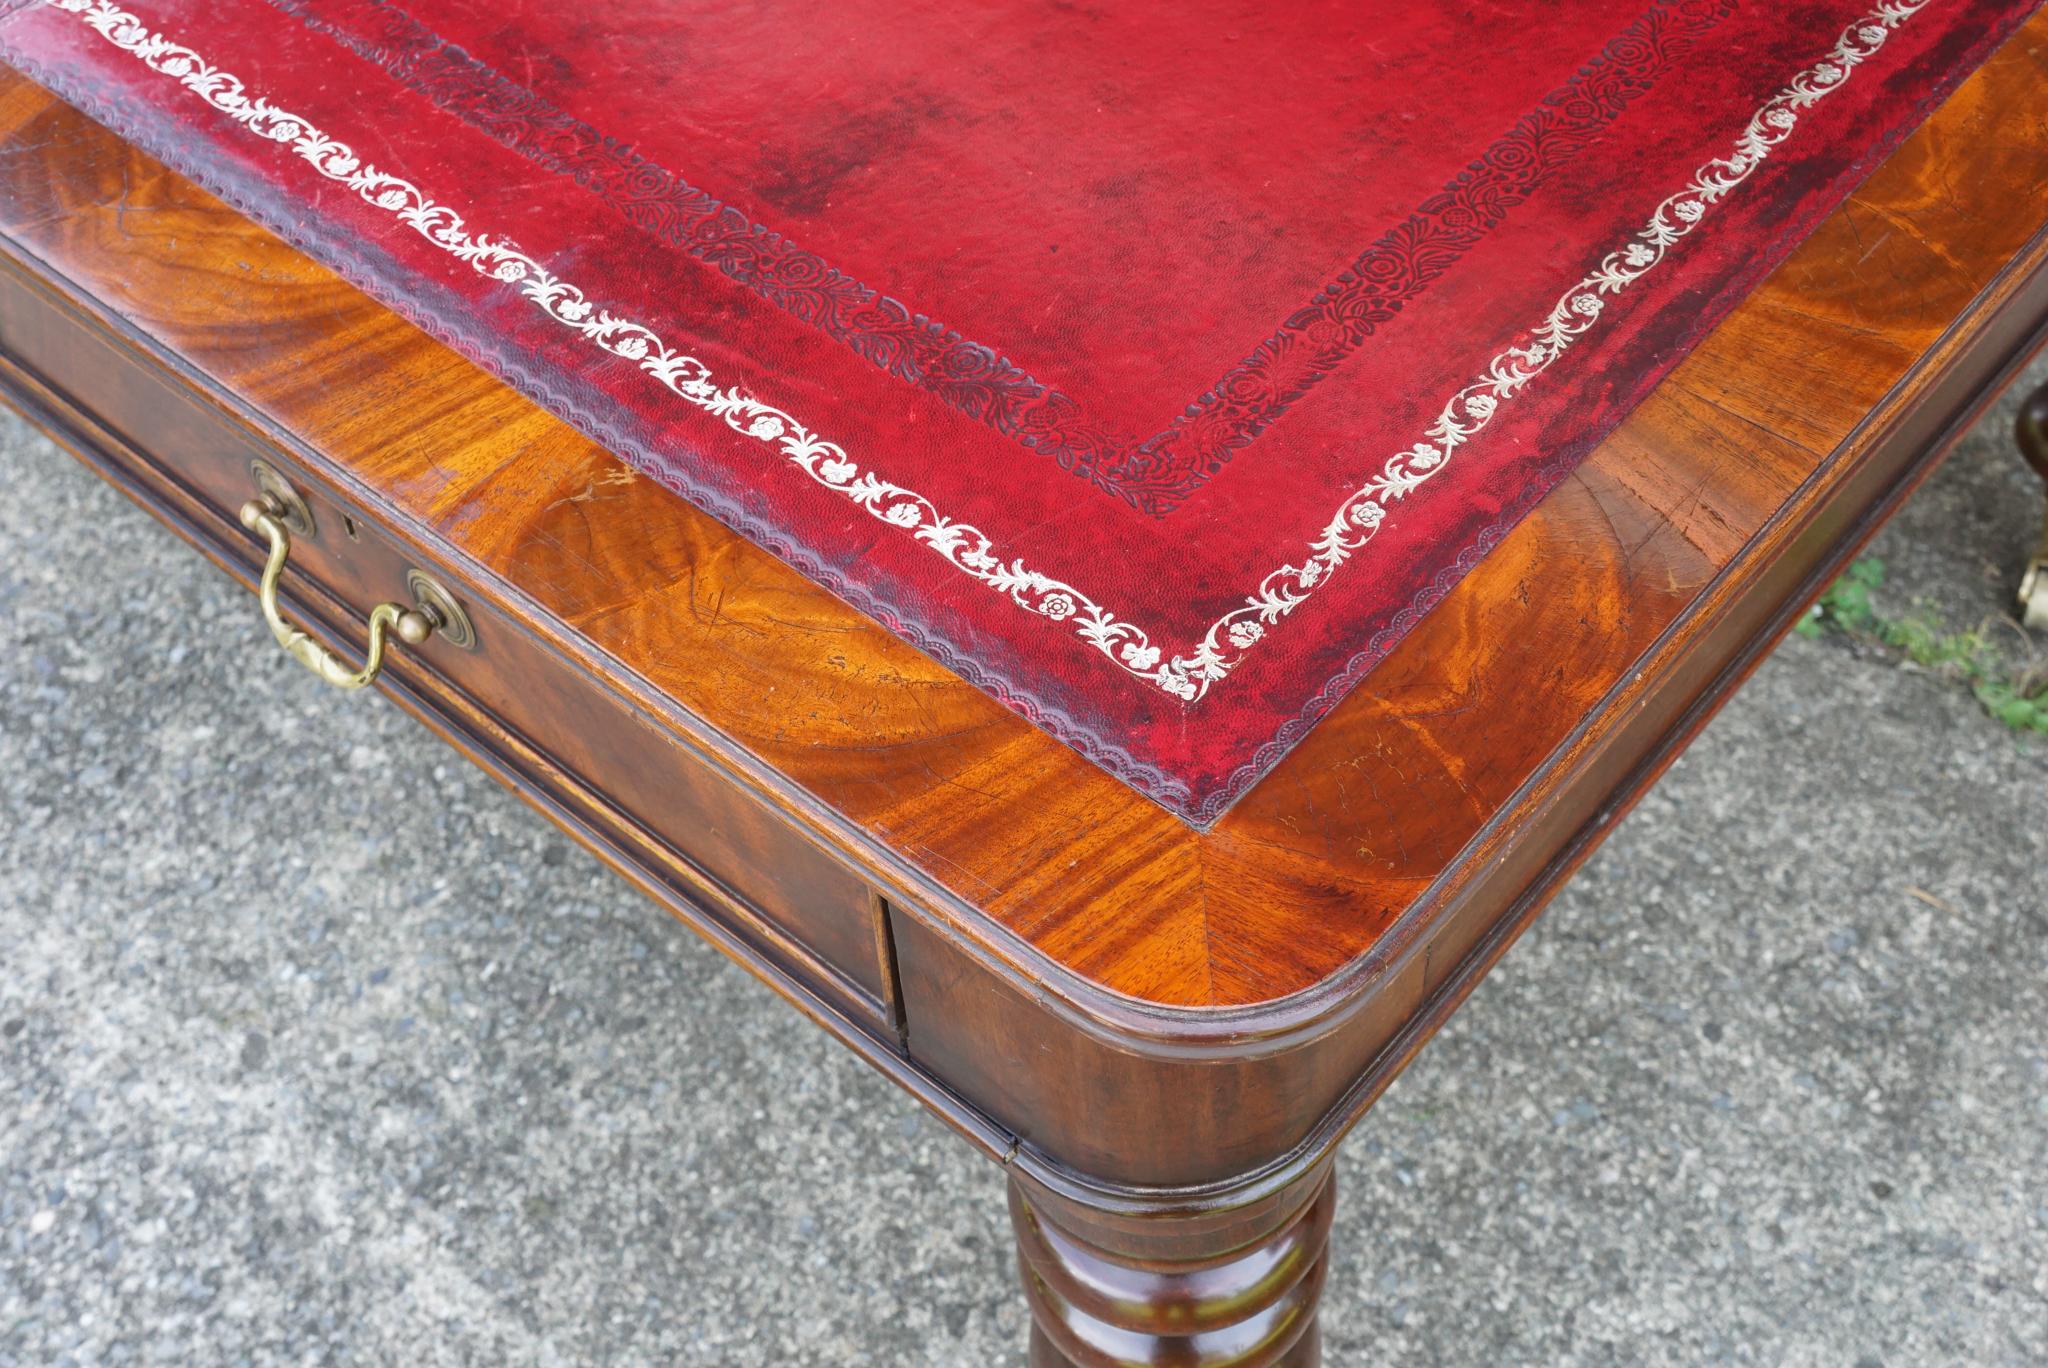 Early 20th Century English Edwardian Writing Table in the Regency Taste